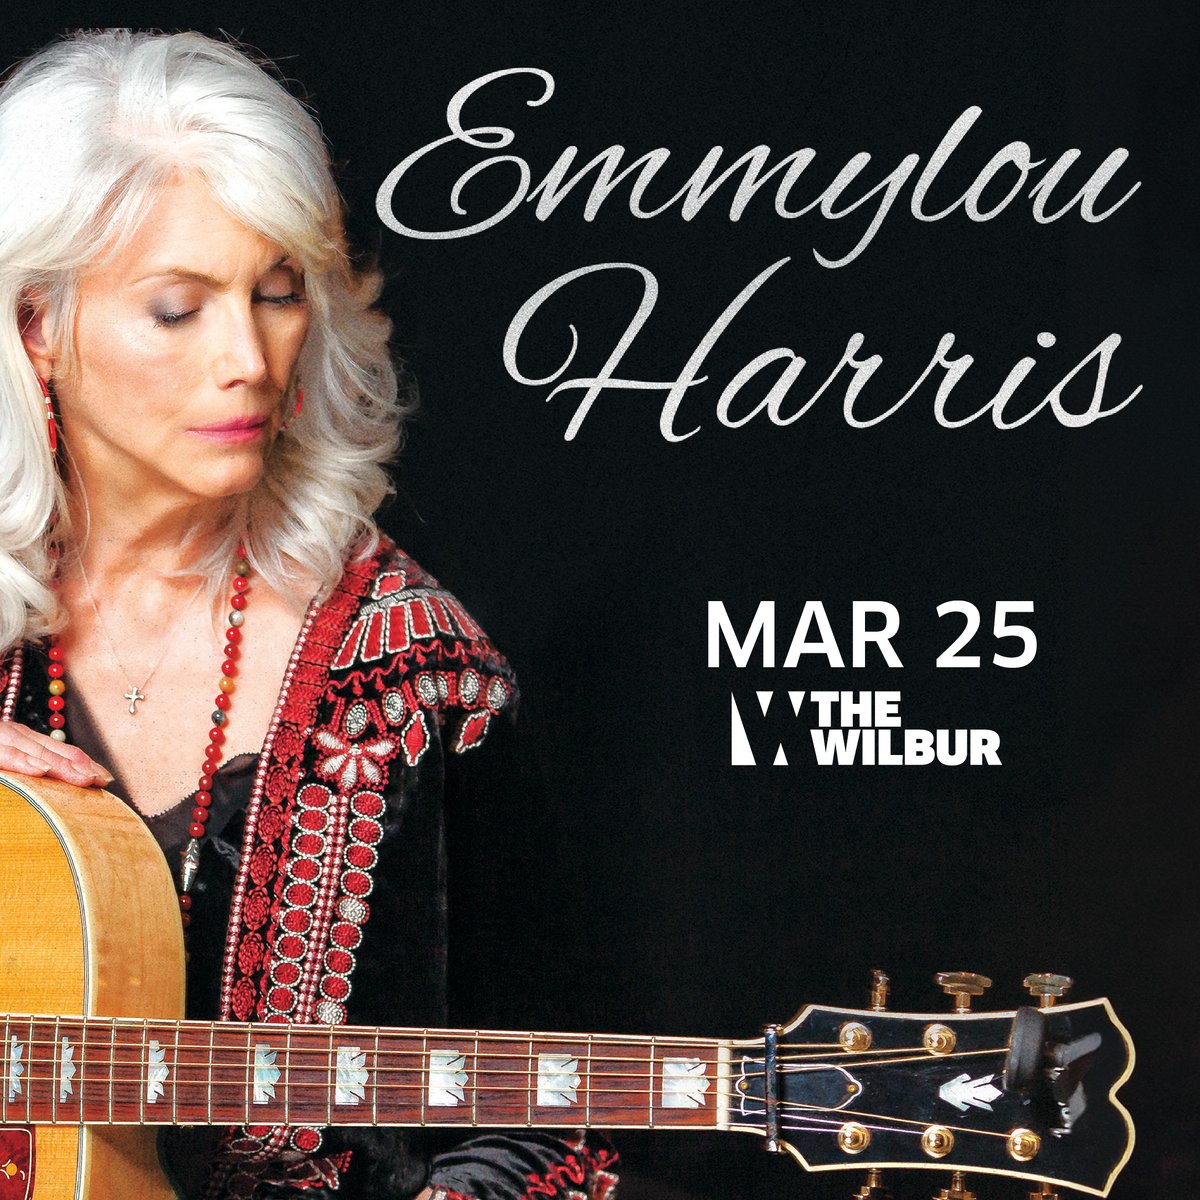 Only a few weeks until we see you in Boston at @The_Wilbur! Get your tickets here thewilbur.com/artist/emmylou…